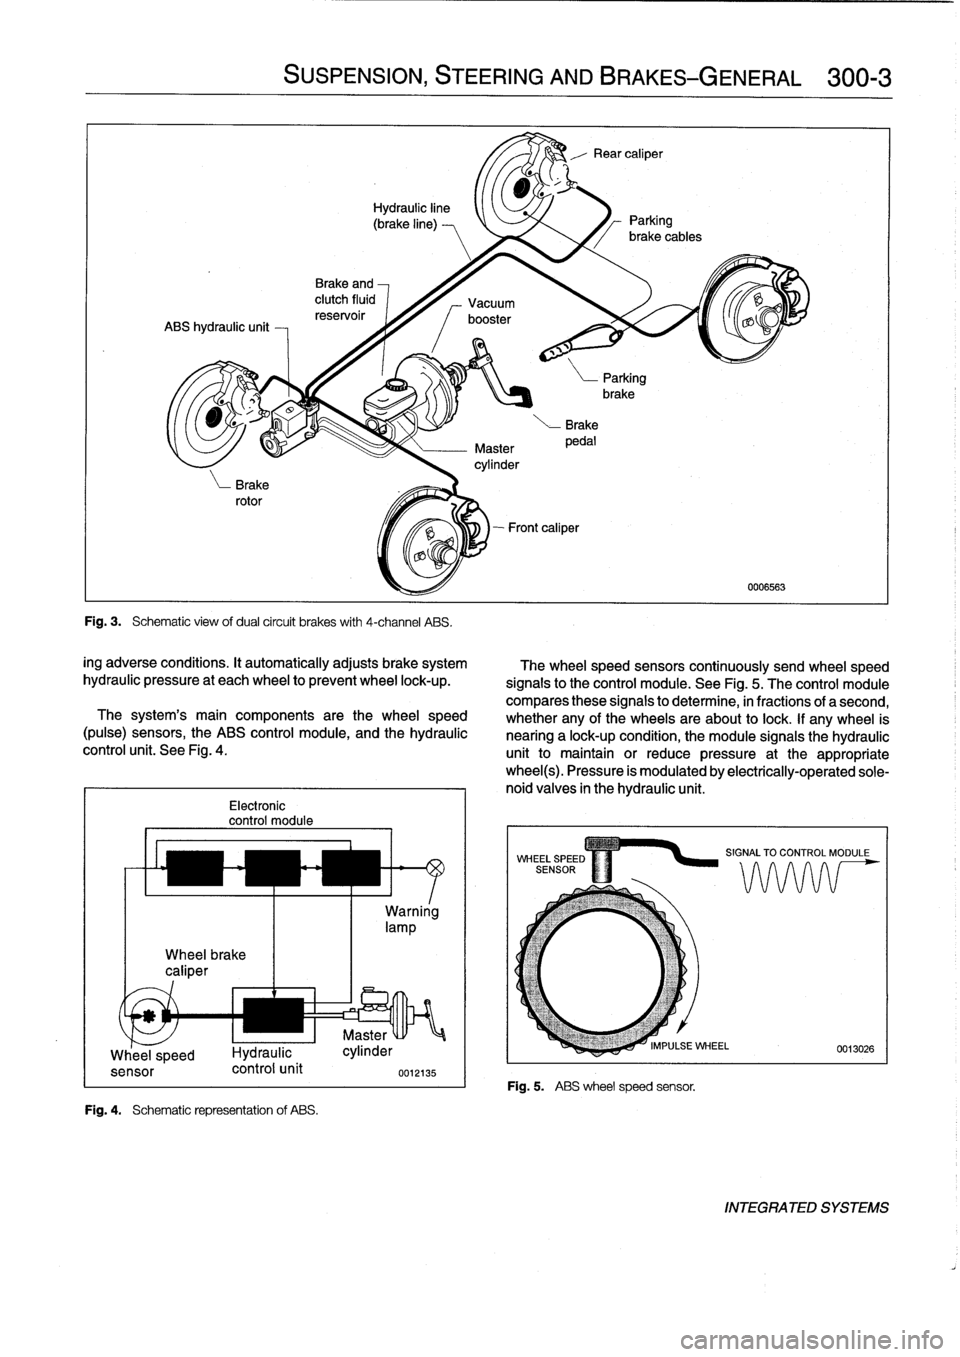 BMW 323i 1997 E36 Owners Manual 
Wheel
brake
caliper

Electronic
control
module
Fig
.
4
.

	

Schematic
representation
of
ABS
.

SUSPENSION,
STEERING
ANDBRAKES-GENERAL

	

300-3

Fig
.
3
.

	

Schematic
view
ofdual
circuit
brakes
wi